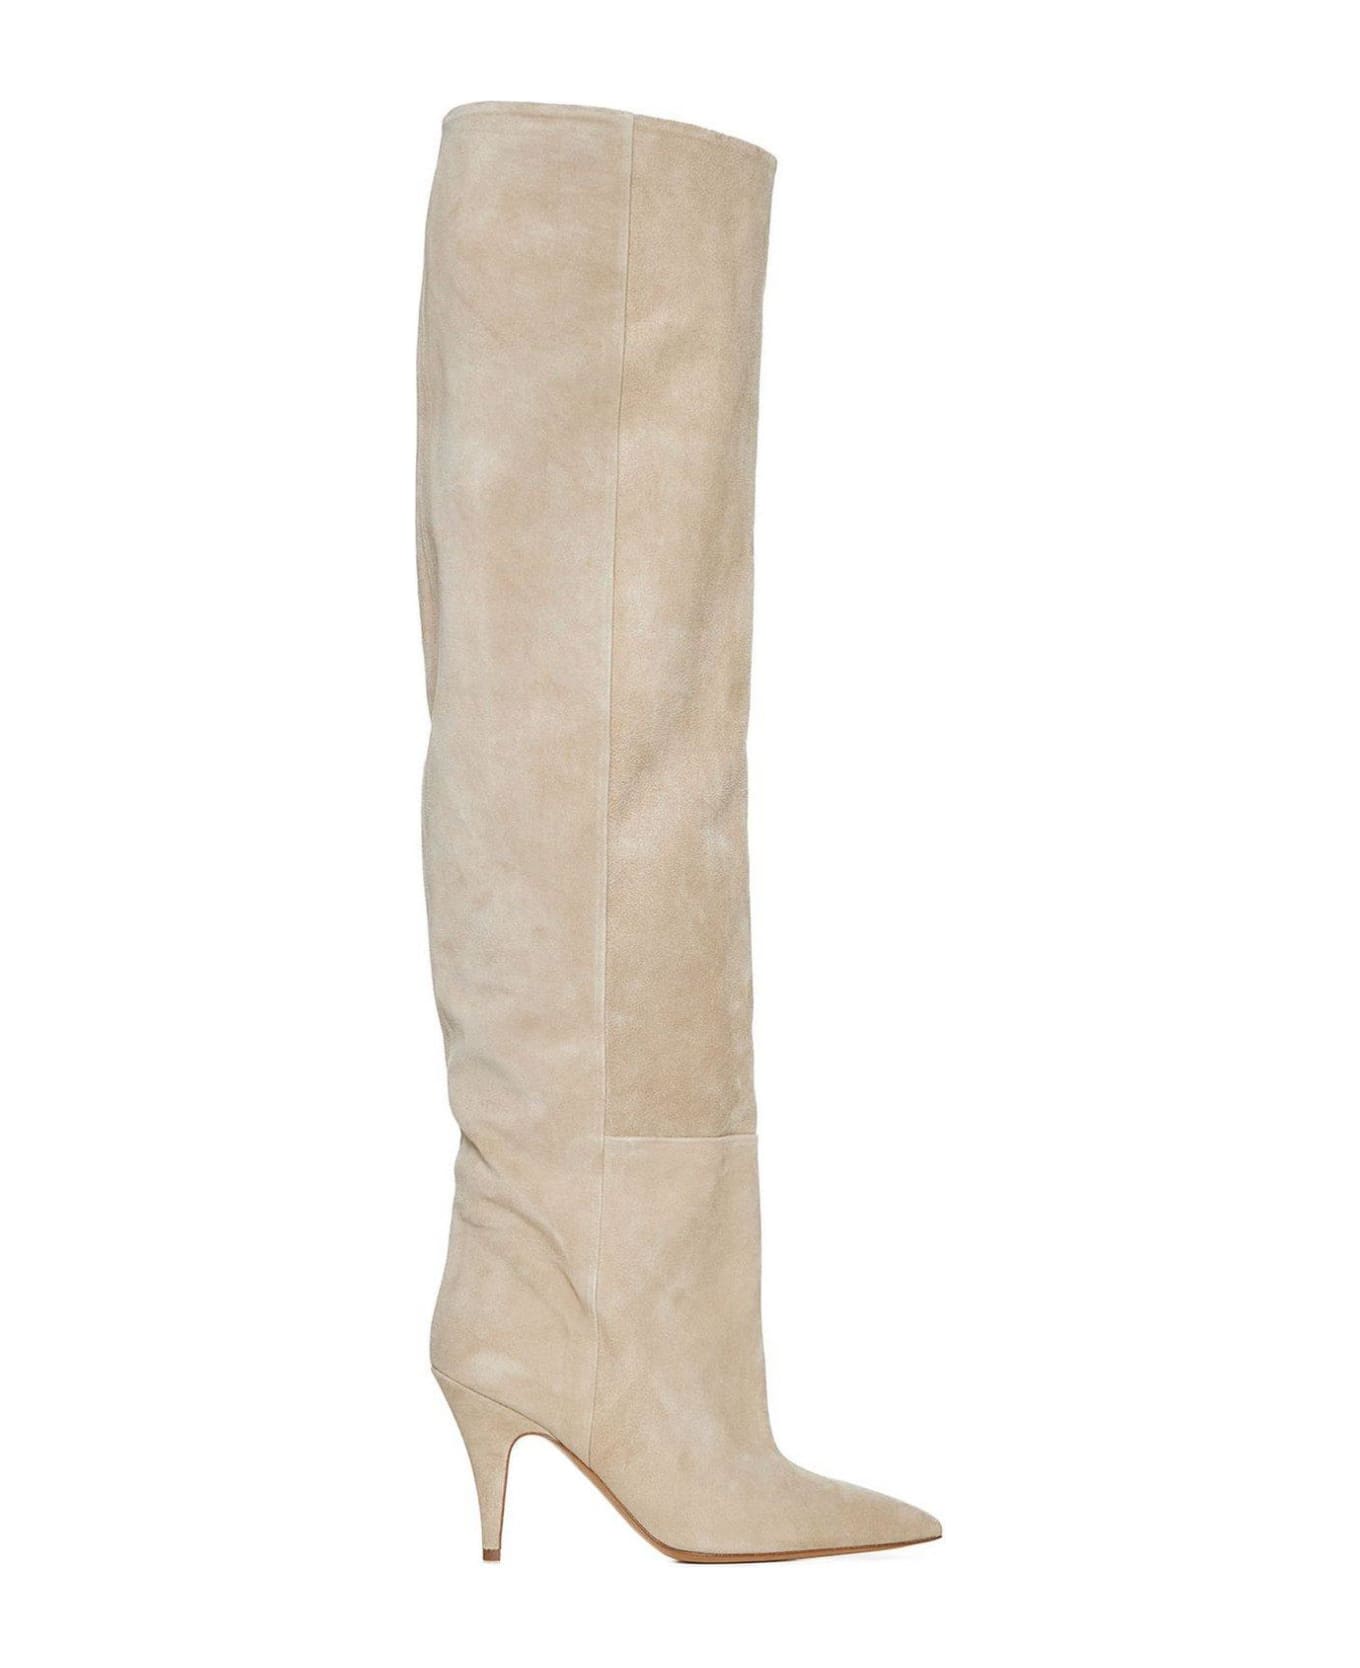 Khaite The River Pointed-toe Knee-high Boots - Beige suede